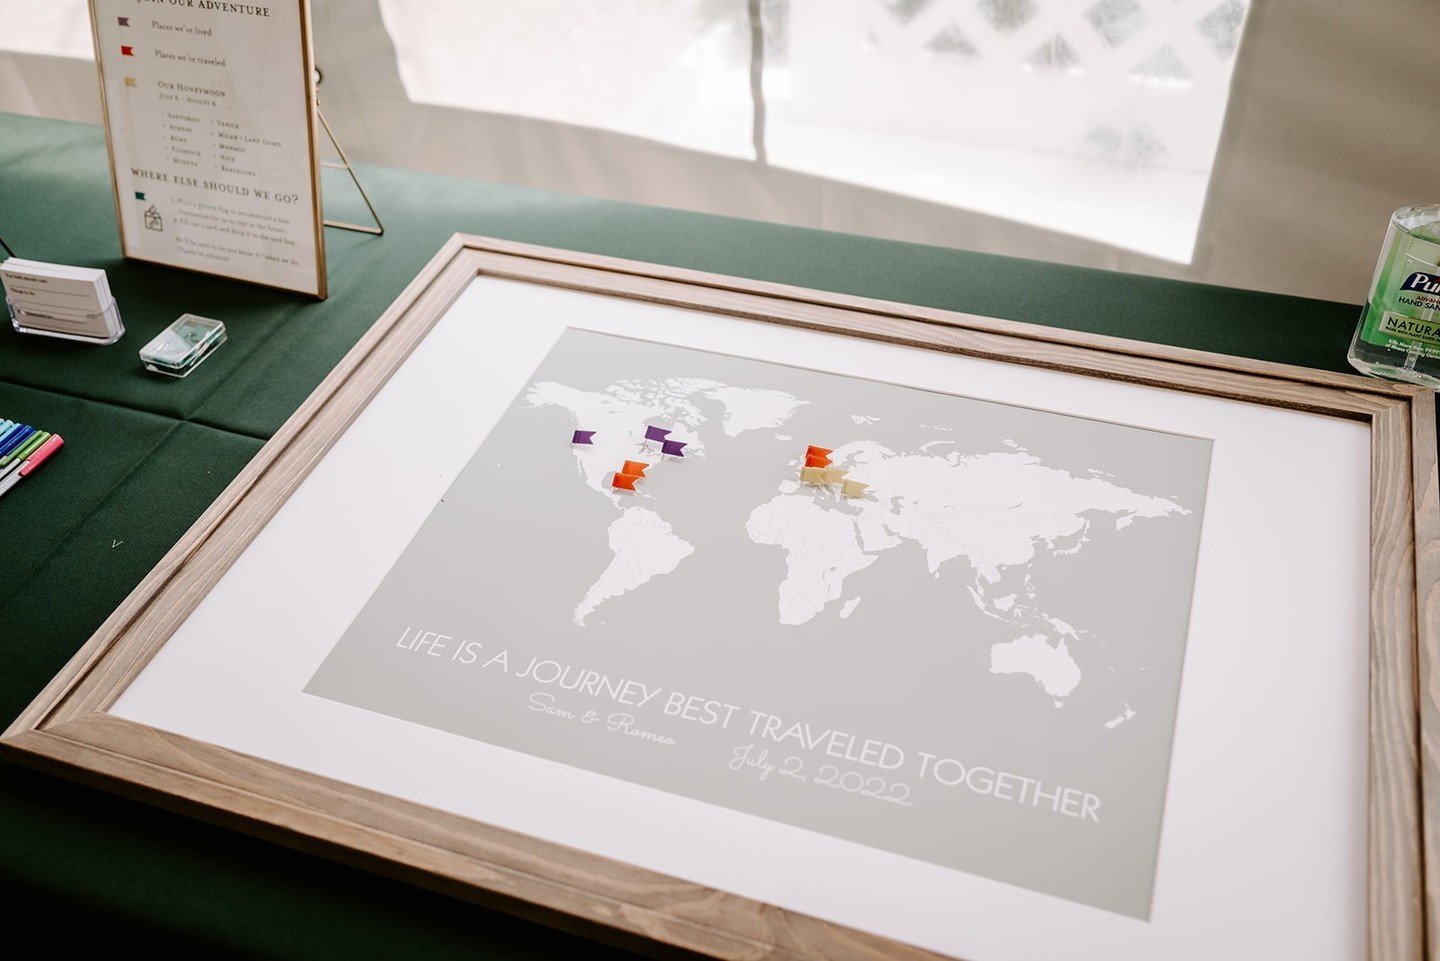 We loved this take on a guest book so much! As avid travelers the couple asked for guests to make suggestions on where they should travel next and any recommendation for while they were there. You could place a flag on the map and leave suggestions o